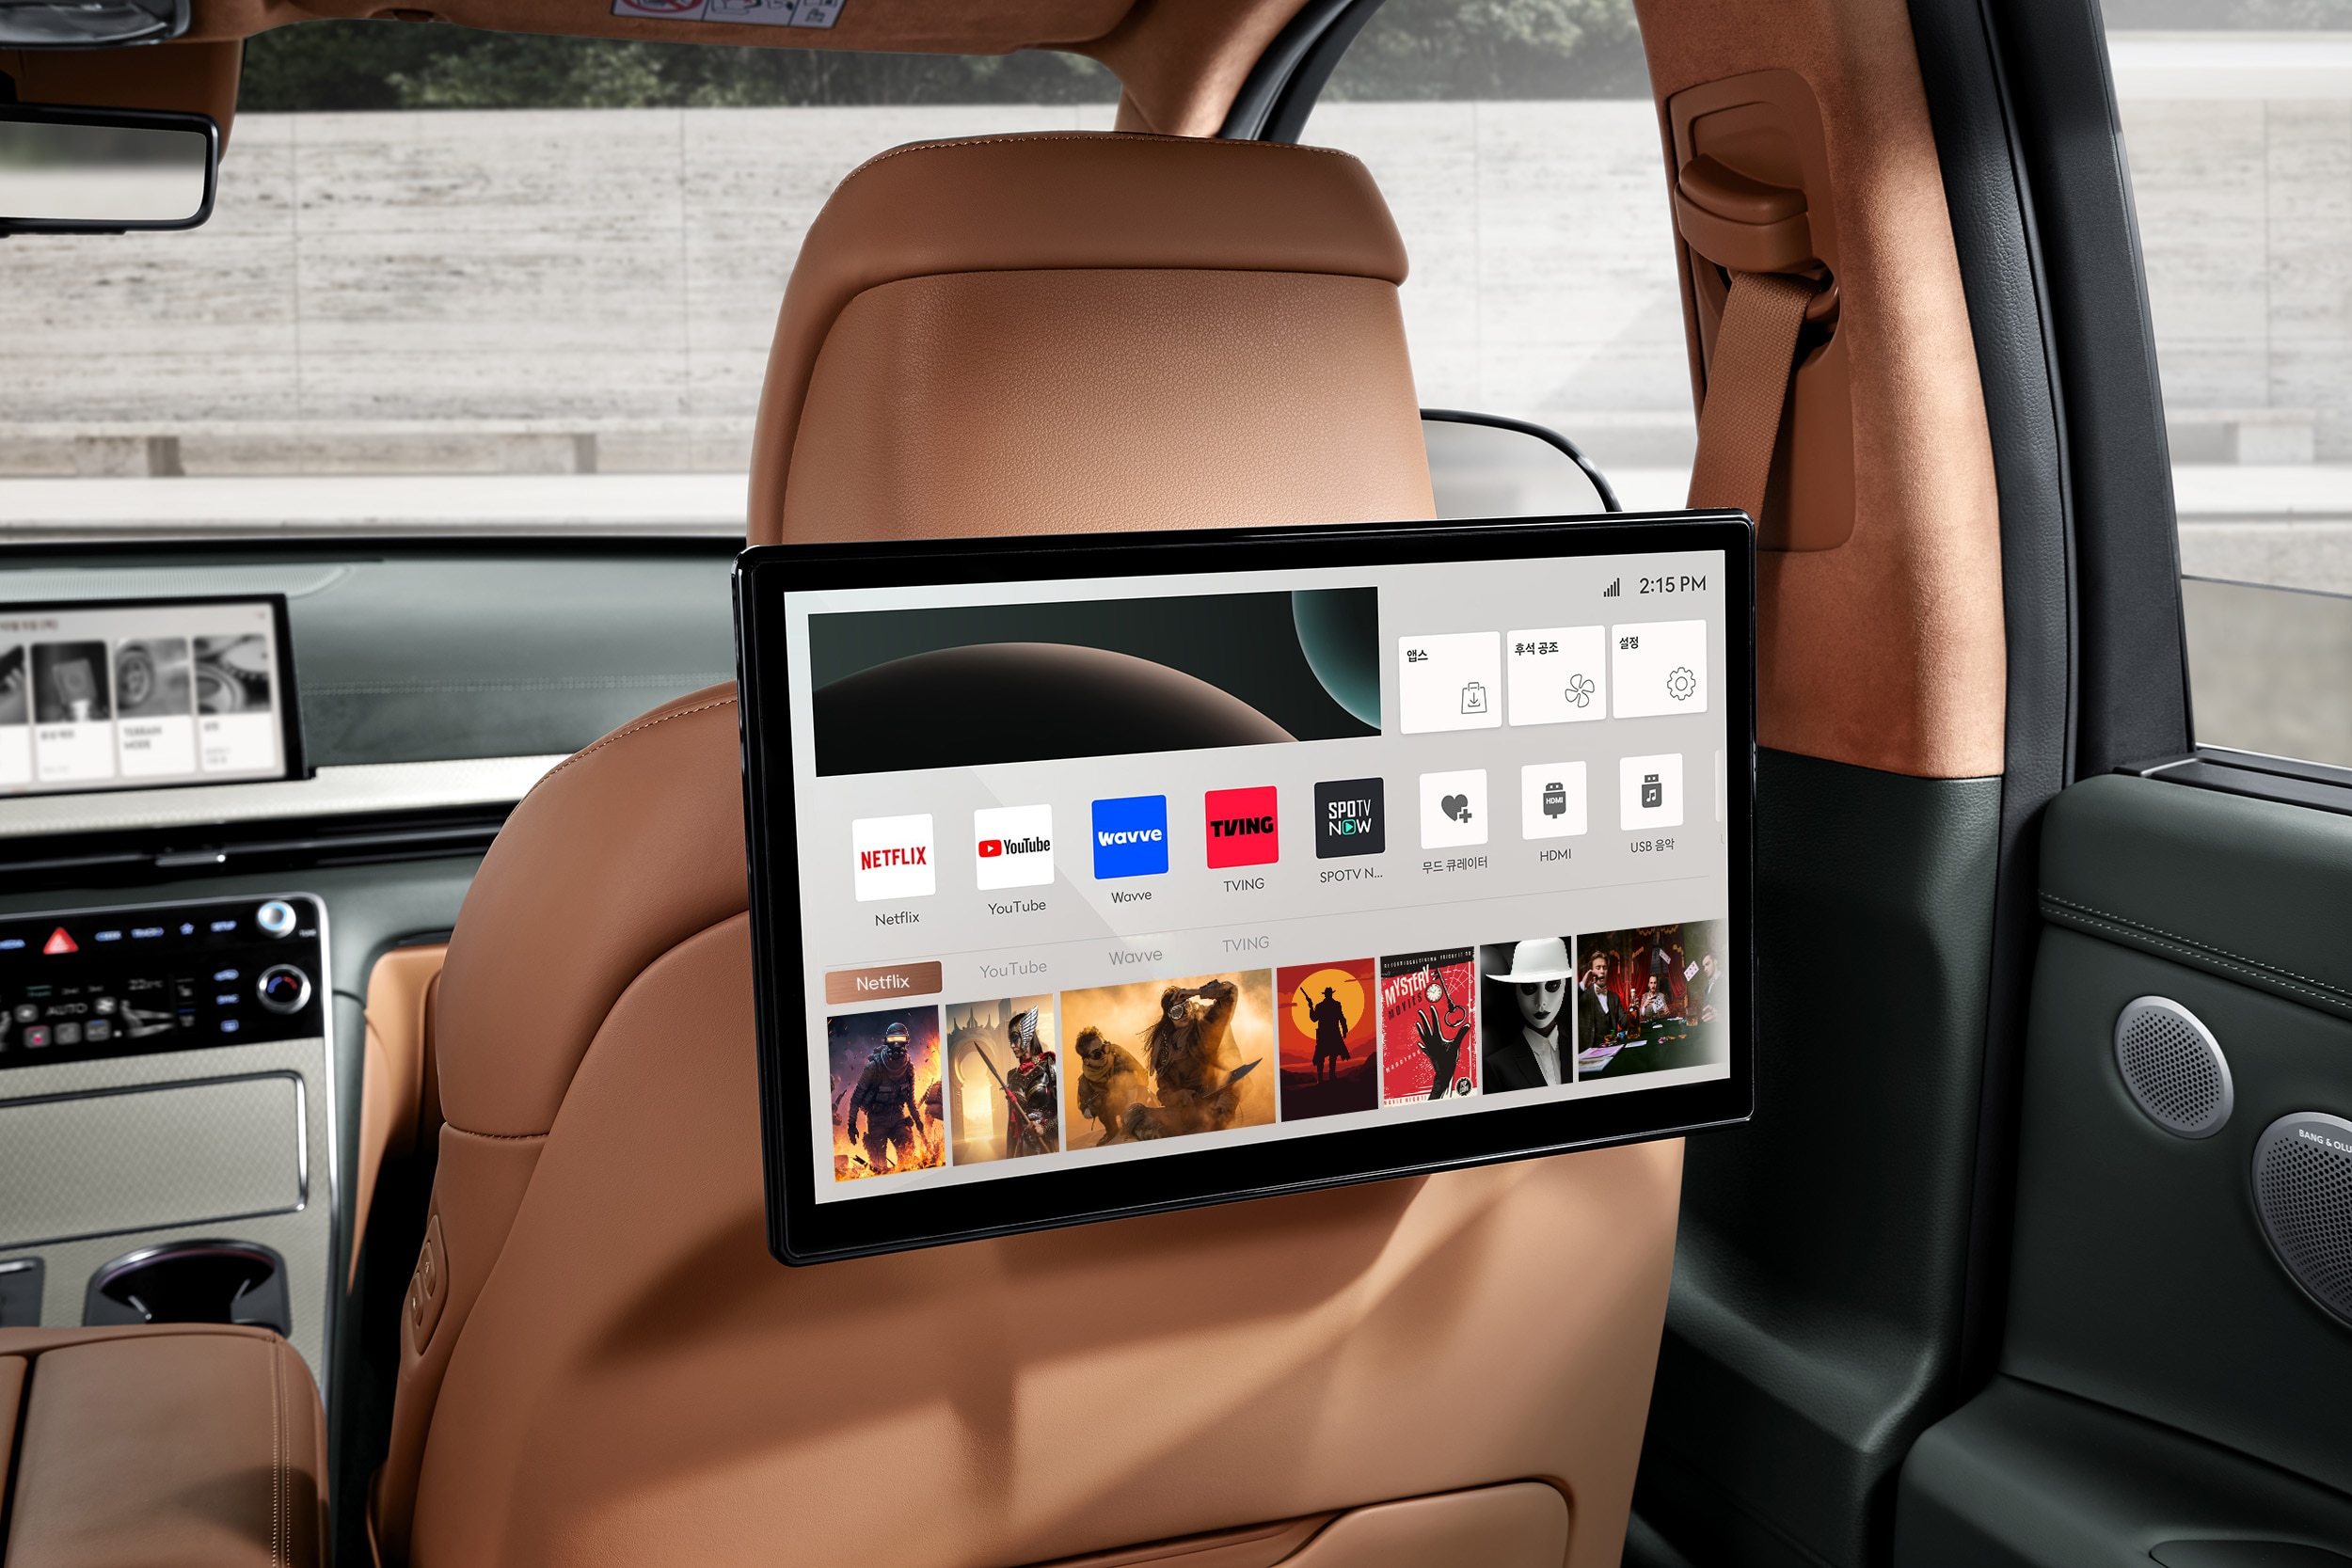 LG and Netflix Bring Great Entertainment Experience to webOS for Automotive